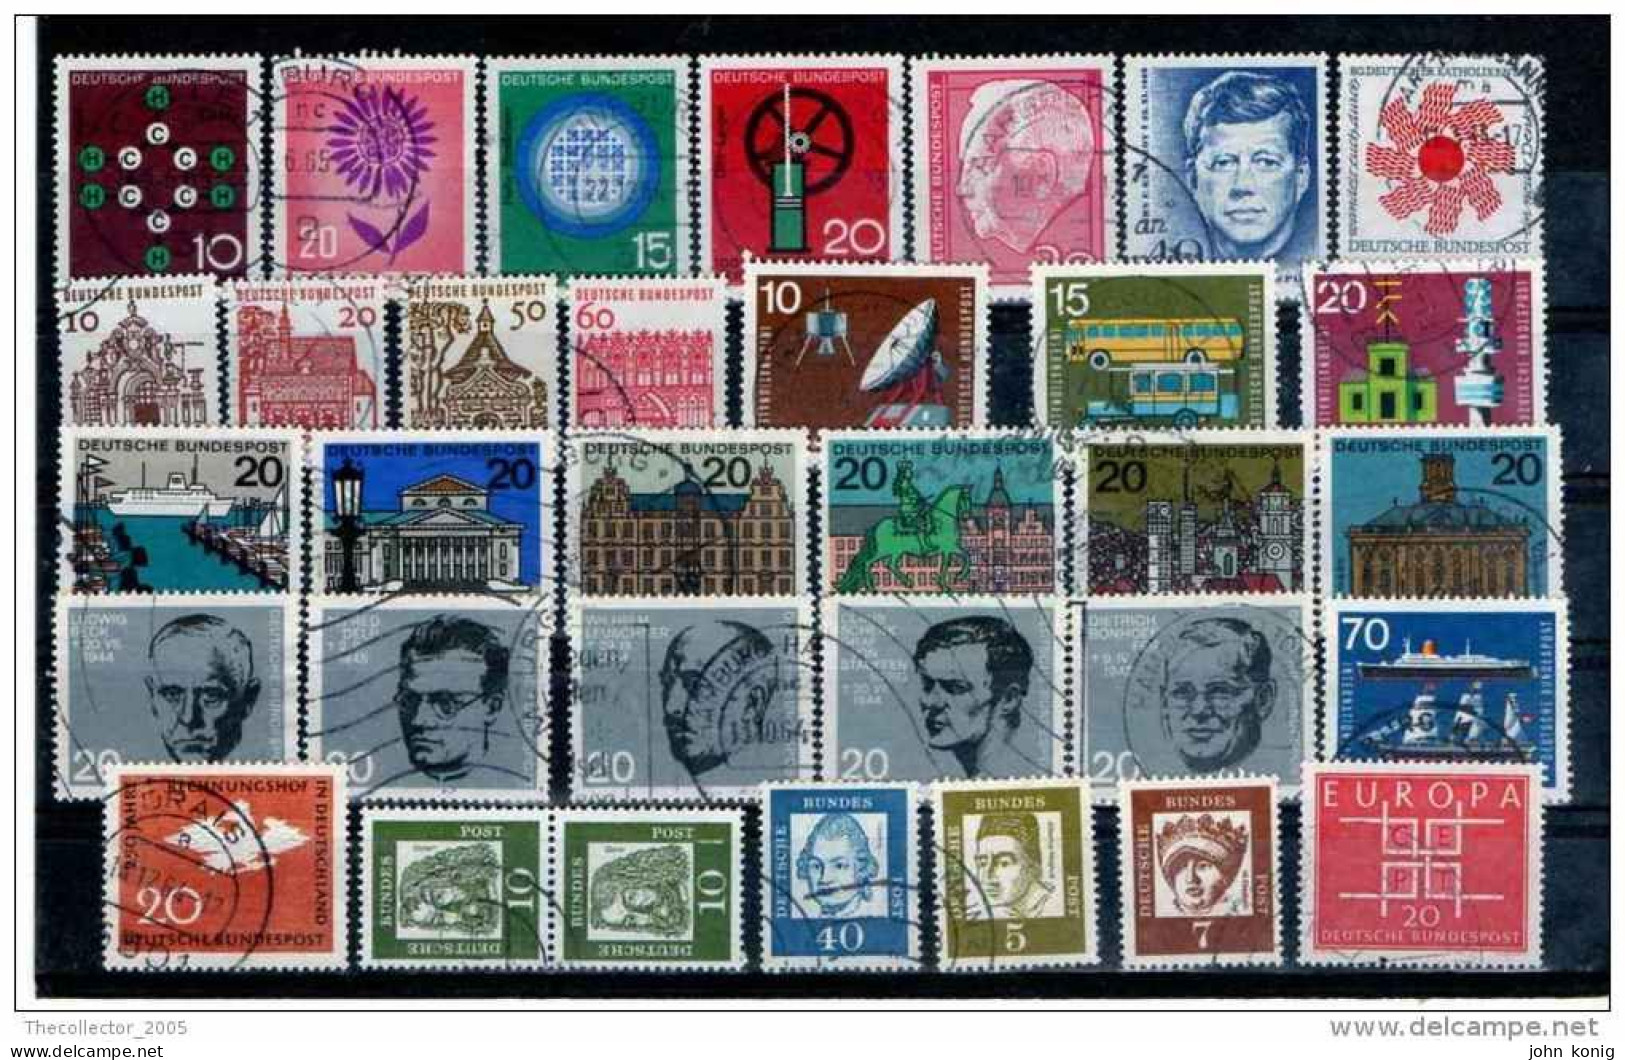 LOTTO FRANCOBOLLI USATI USED STAMPS LOT GERMANIA FEDERALE GERMANY FED. BUNDESPOST ('50s-'60s) - 1959-1980